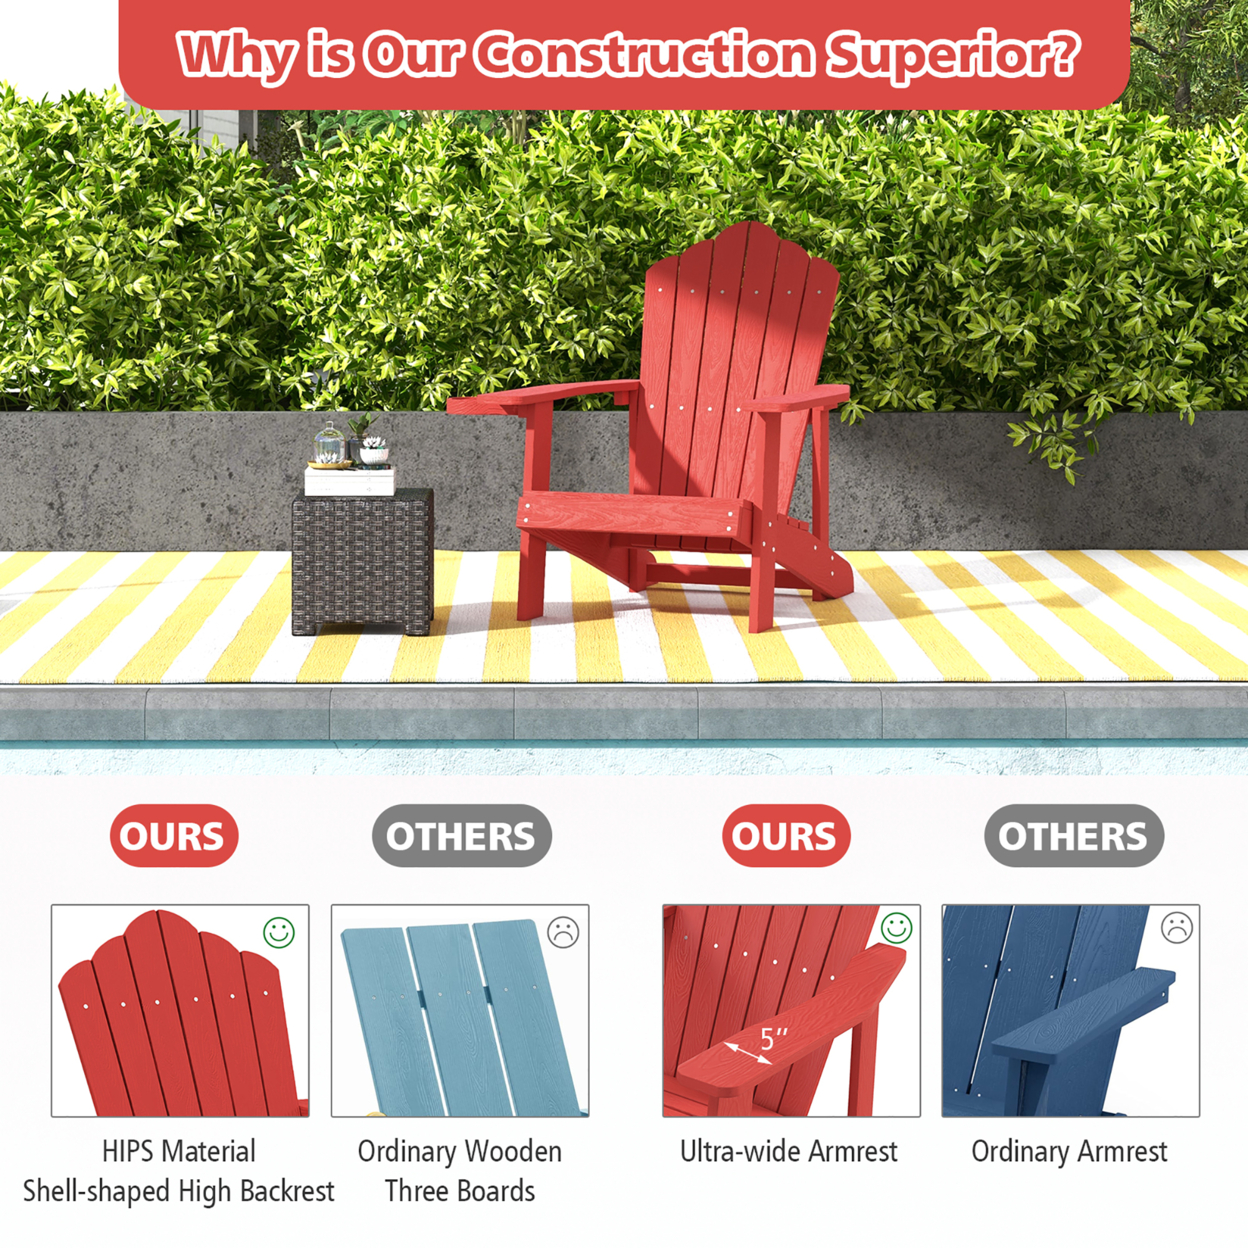 Patio HIPS Outdoor Weather Resistant Slatted Chair Adirondack Chair W/ Cup Holder - Black